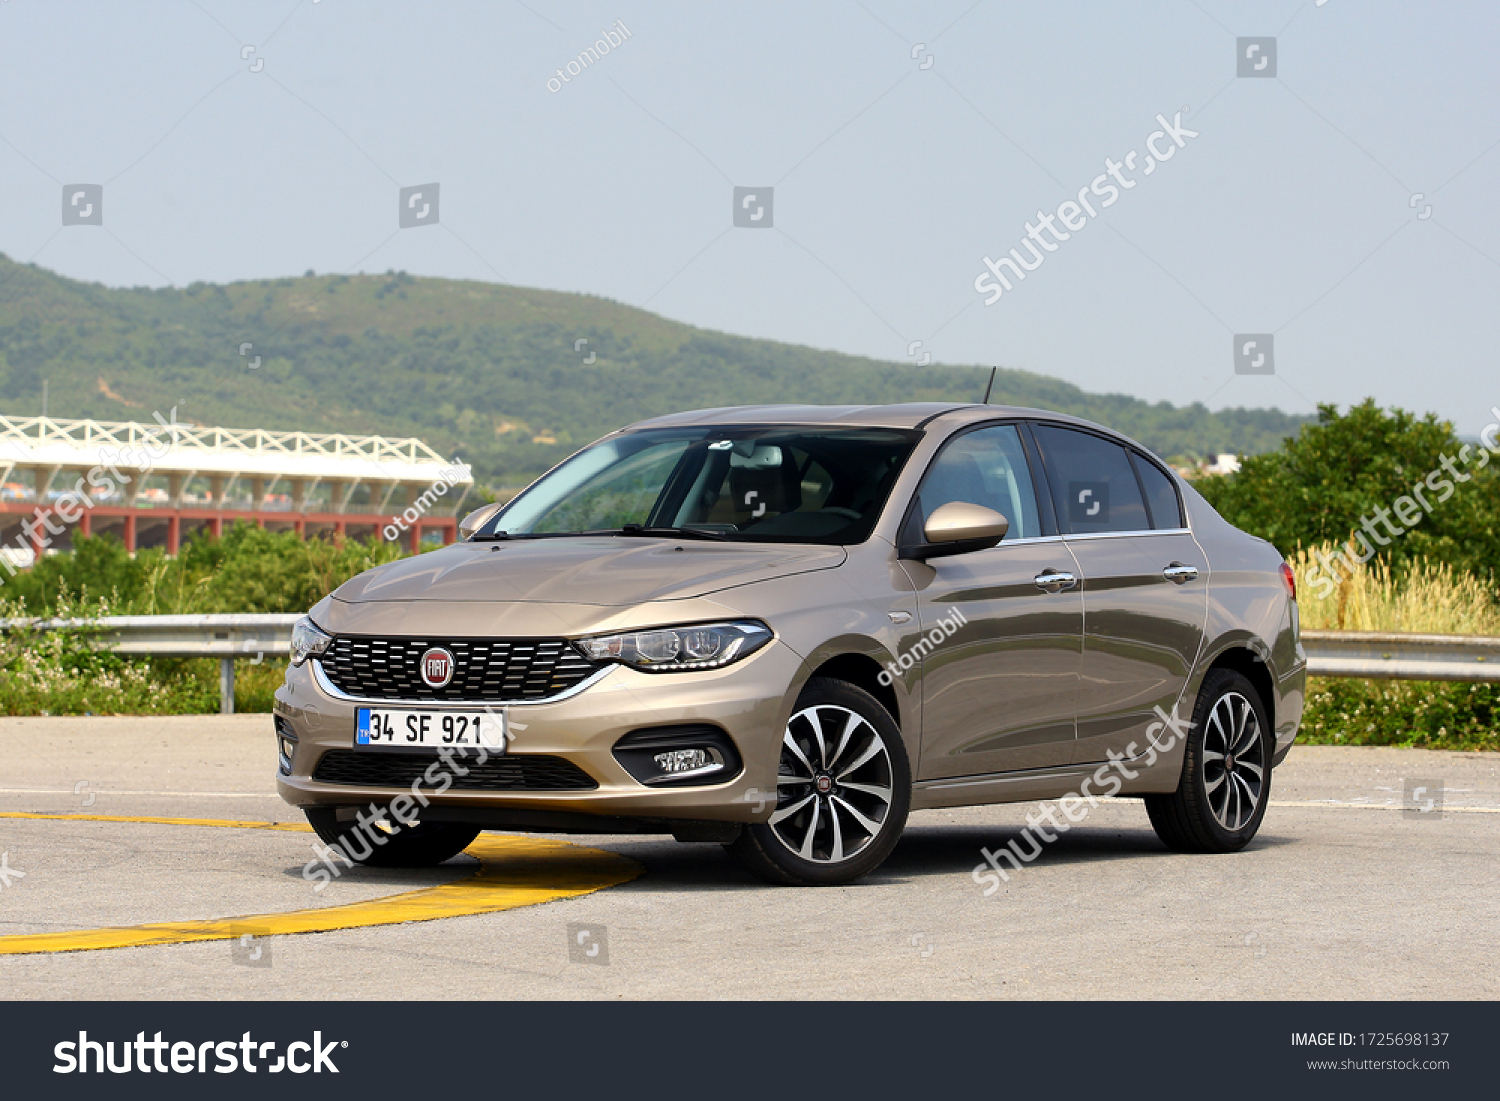 Istanbulmay 8 2020 Fiat Tipo Compact Stock Photo Edit Now 1725698137